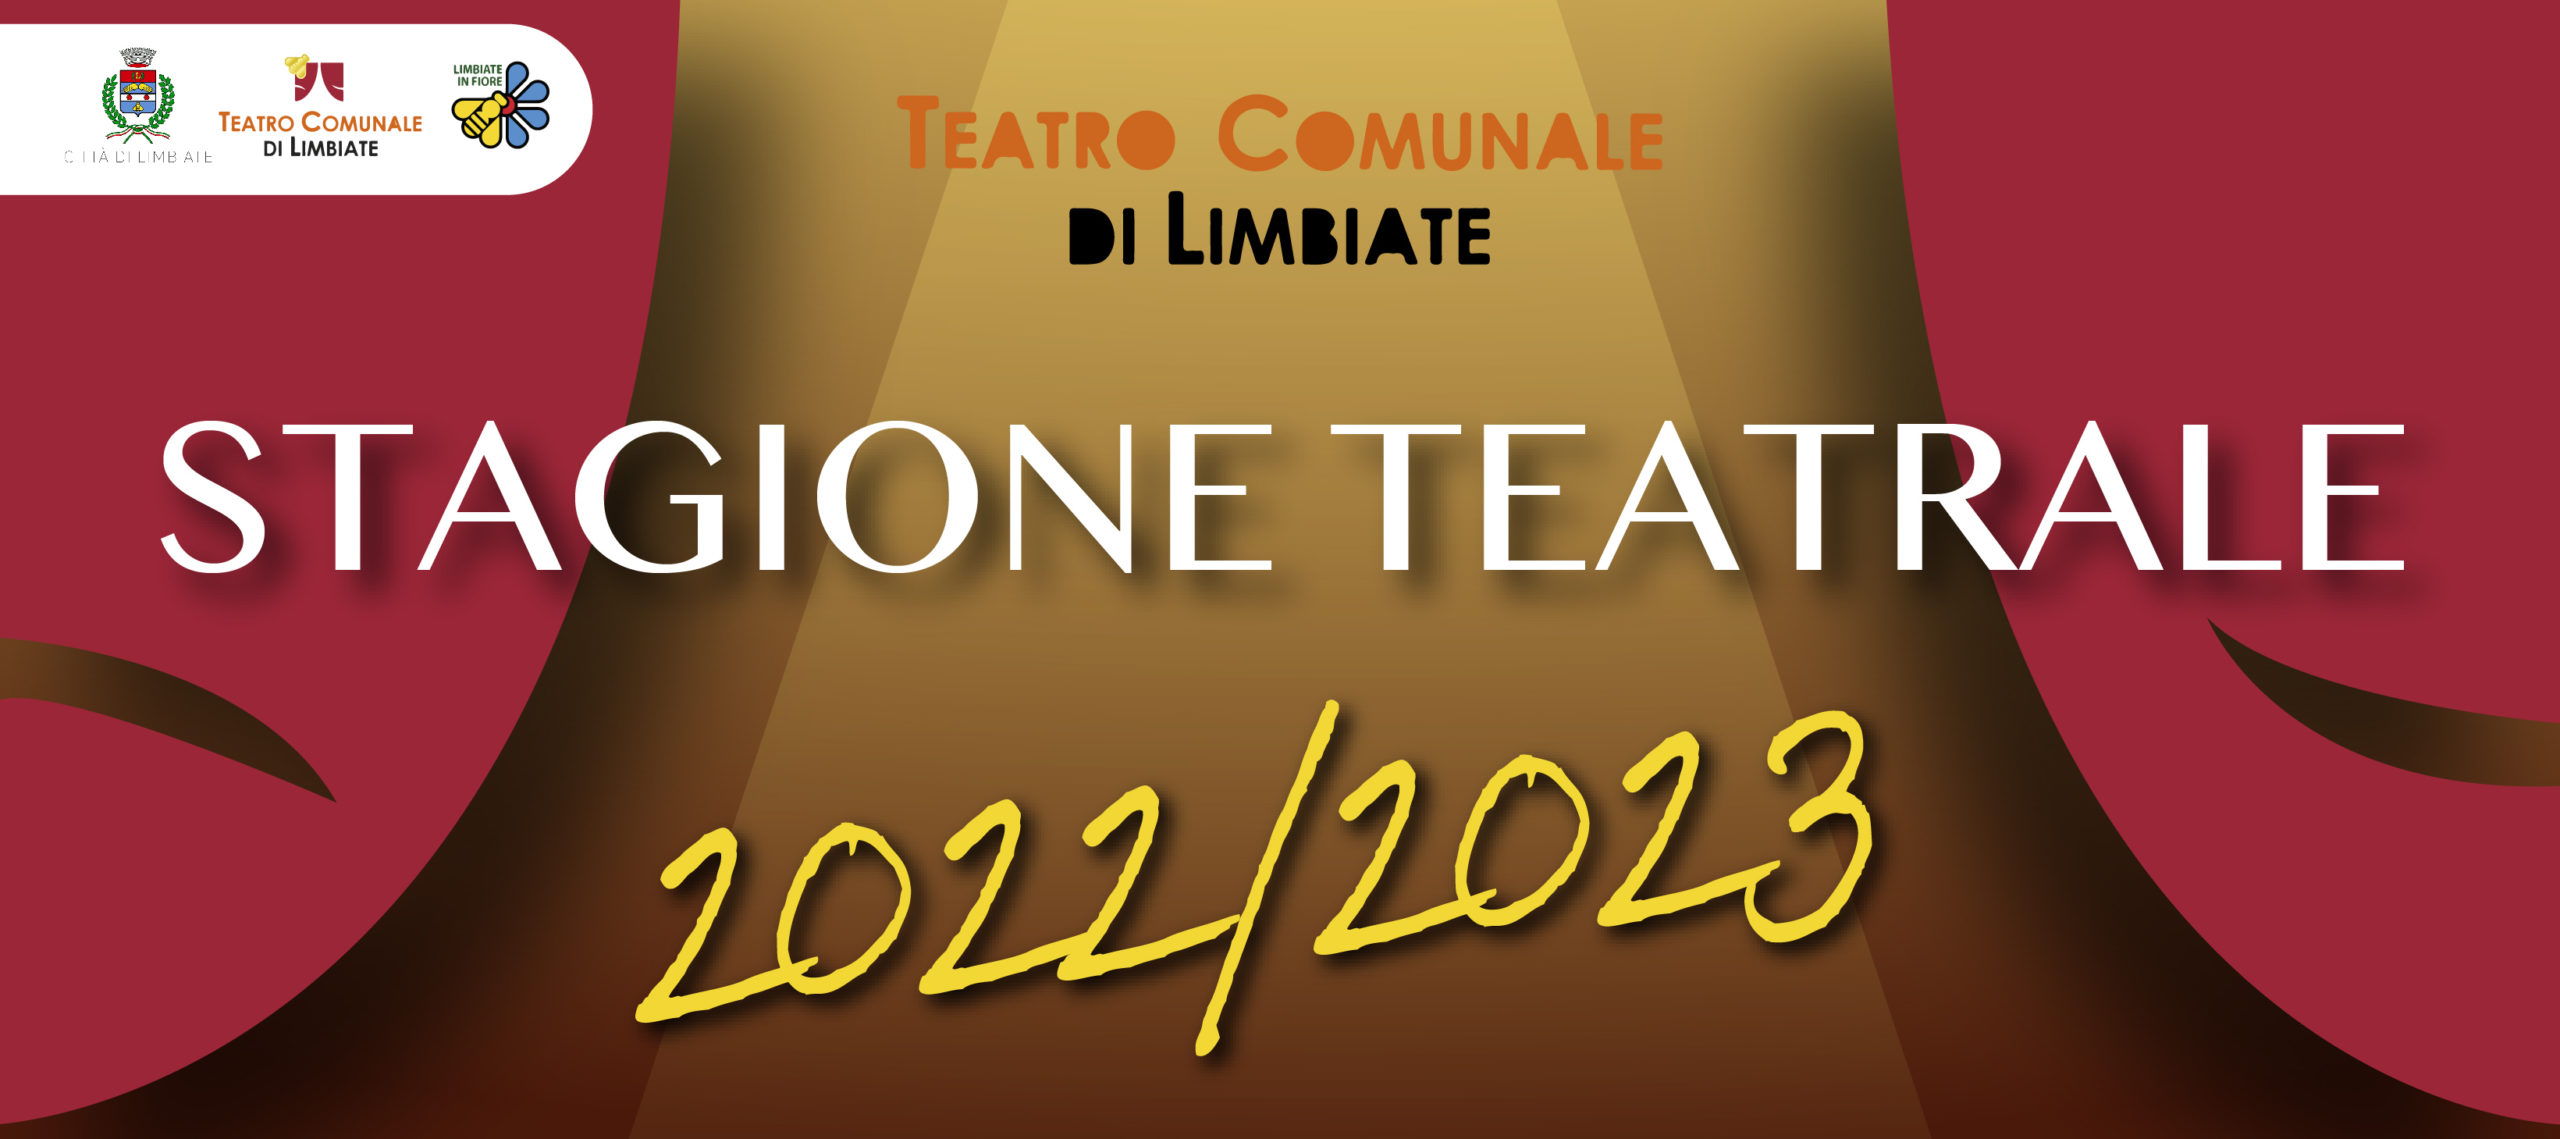 Stagione Teatrale 2022-2023